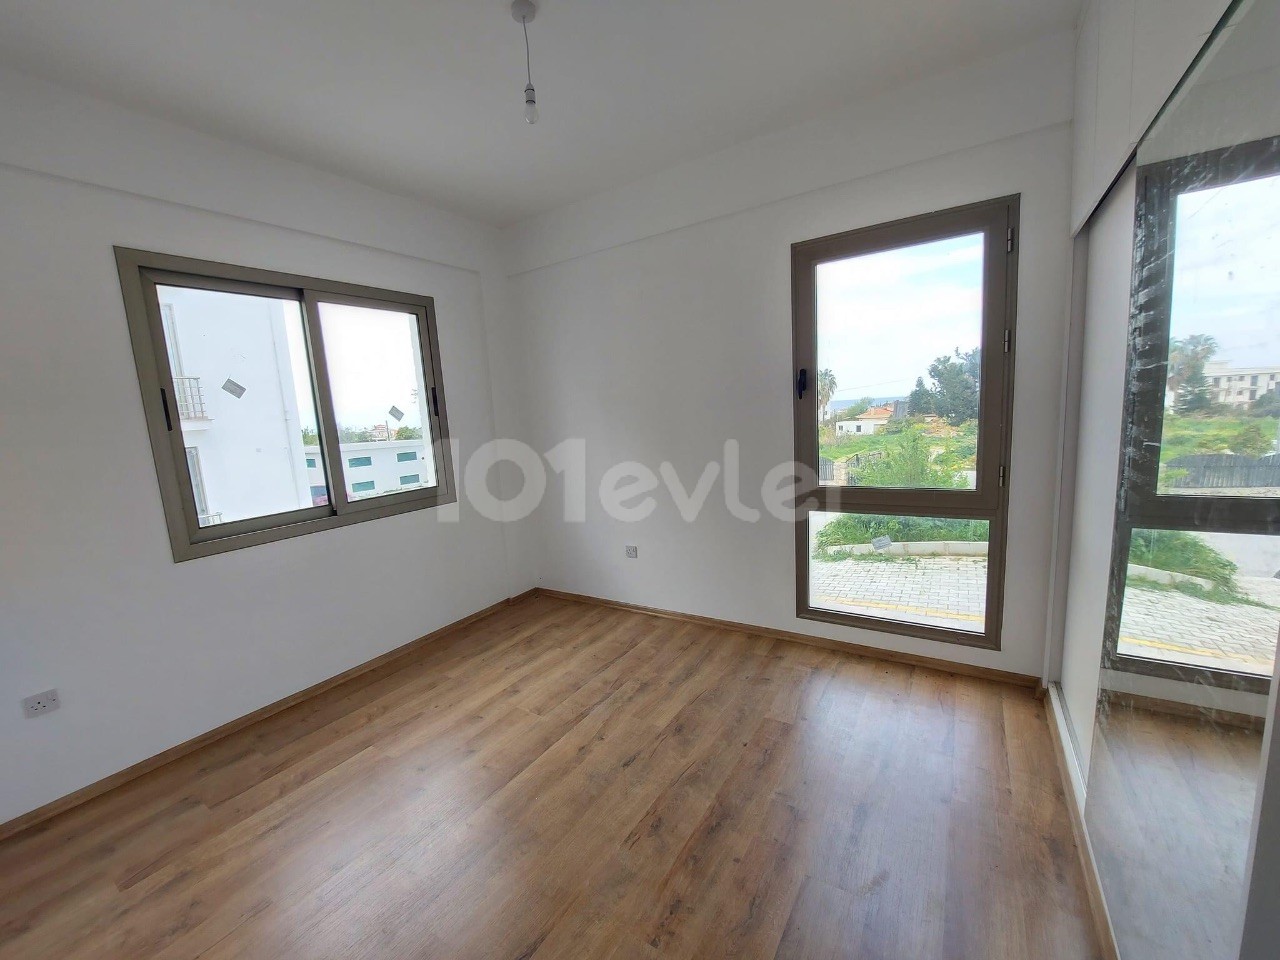 Ground floor 2+1 flat in central location in Lapta ** 